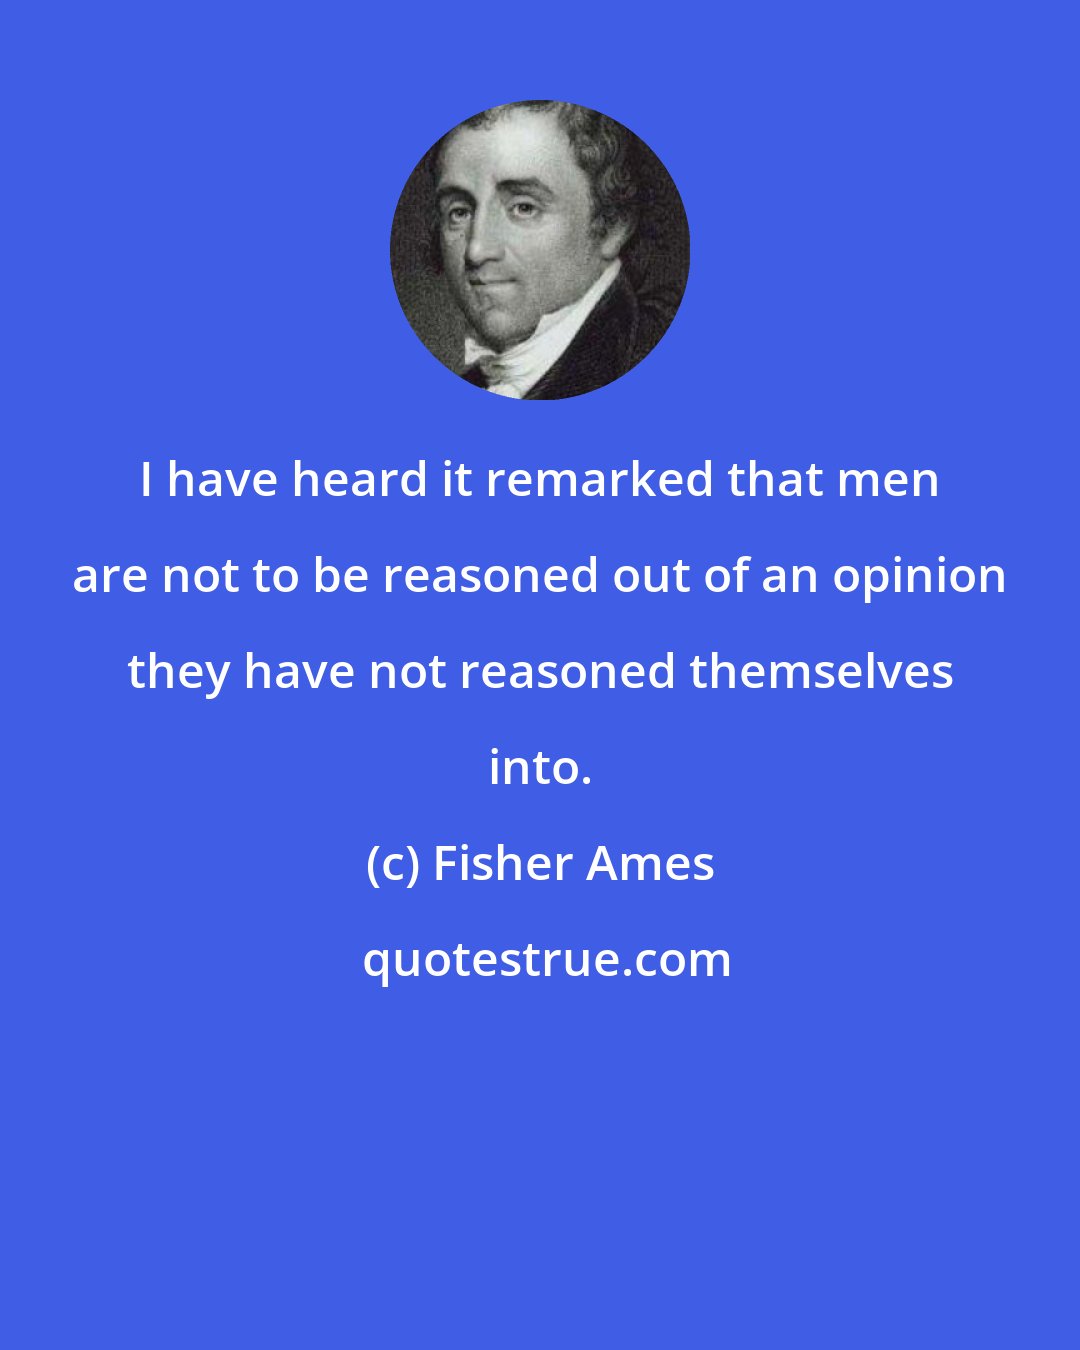 Fisher Ames: I have heard it remarked that men are not to be reasoned out of an opinion they have not reasoned themselves into.